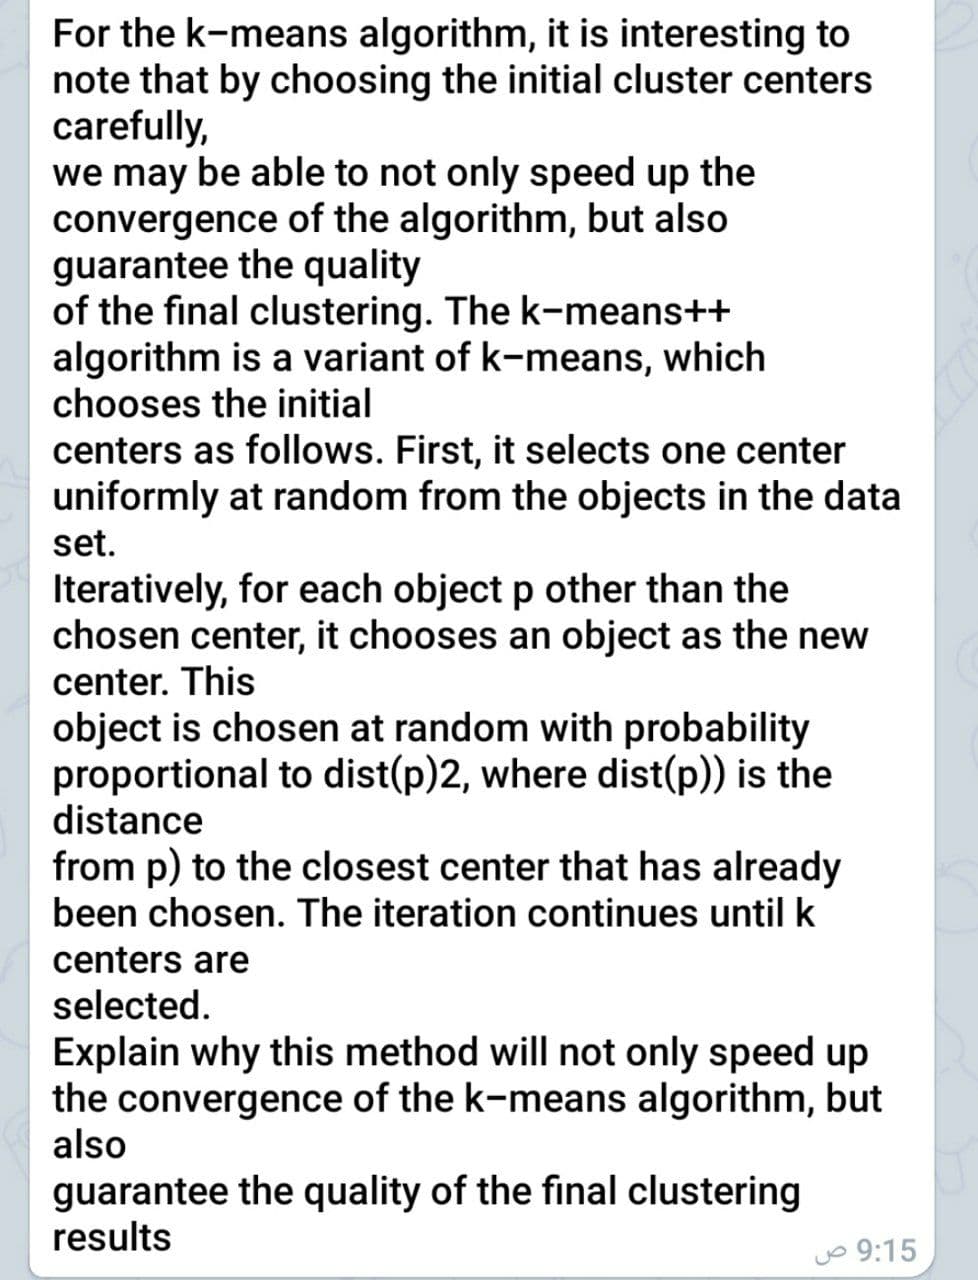 For the k-means algorithm, it is interesting to
note that by choosing the initial cluster centers
carefully,
we may be able to not only speed up the
convergence of the algorithm, but also
guarantee the quality
of the final clustering. The k-means++
algorithm is a variant of k-means, which
chooses the initial
centers as follows. First, it selects one center
uniformly at random from the objects in the data
set.
Iteratively, for each object p other than the
chosen center, it chooses an object as the new
center. This
object is chosen at random with probability
proportional to dist(p)2, where dist(p)) is the
distance
from p) to the closest center that has already
been chosen. The iteration continues until k
centers are
selected.
Explain why this method will not only speed up
the convergence of the k-means algorithm, but
also
guarantee the quality of the final clustering
results
jo 9:15
